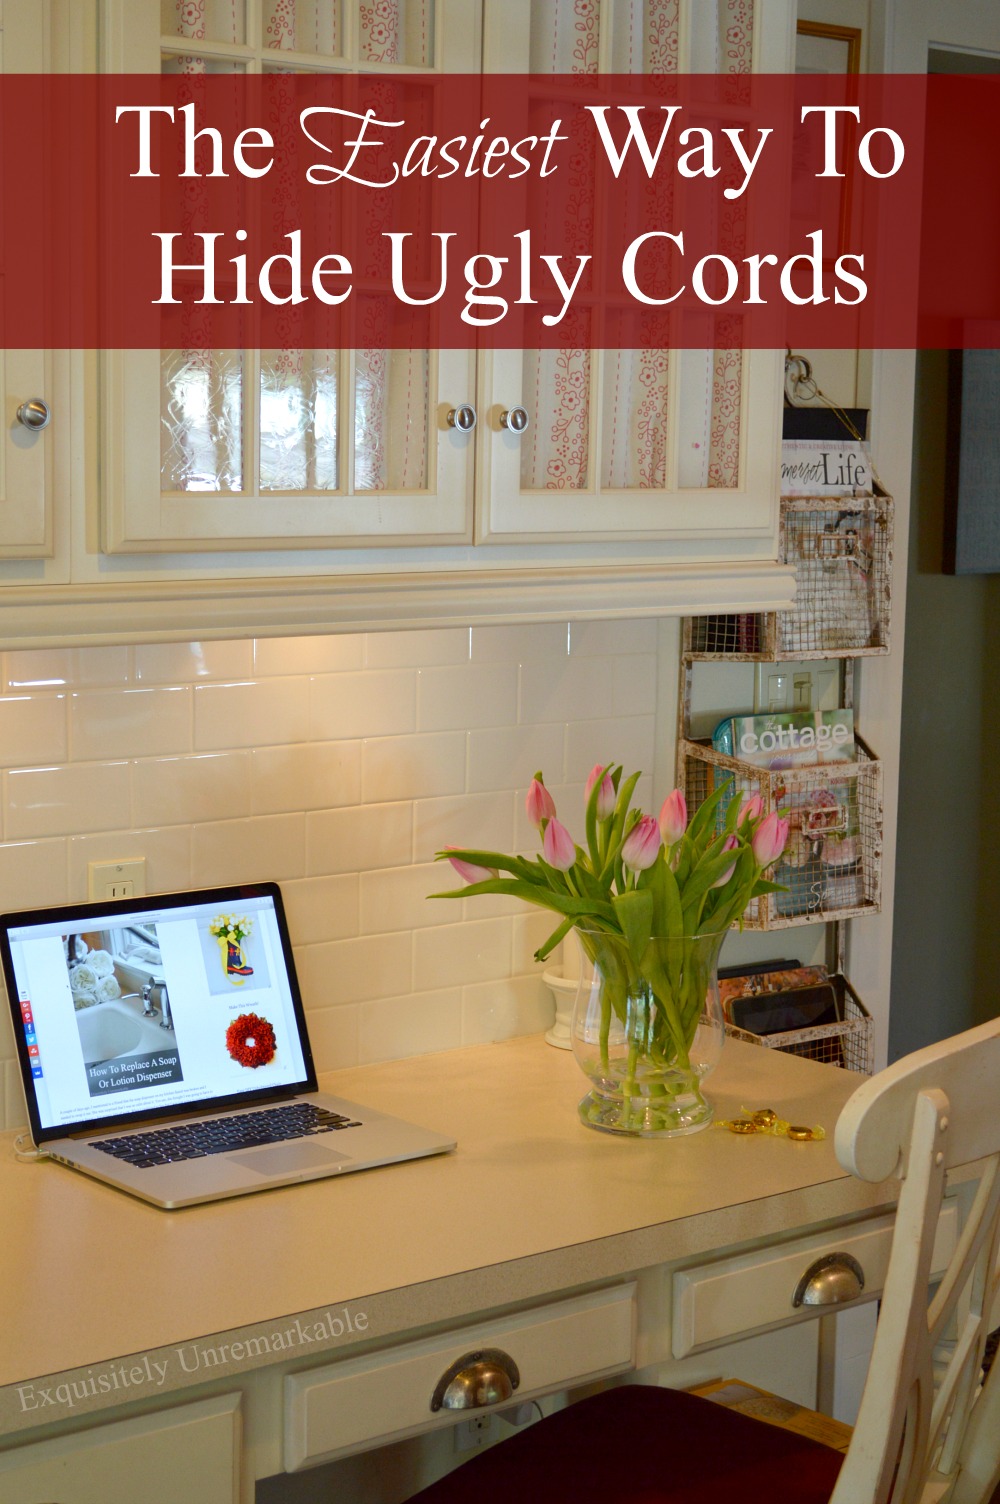 DIY way to hide cables, cords and wires with cable grommets